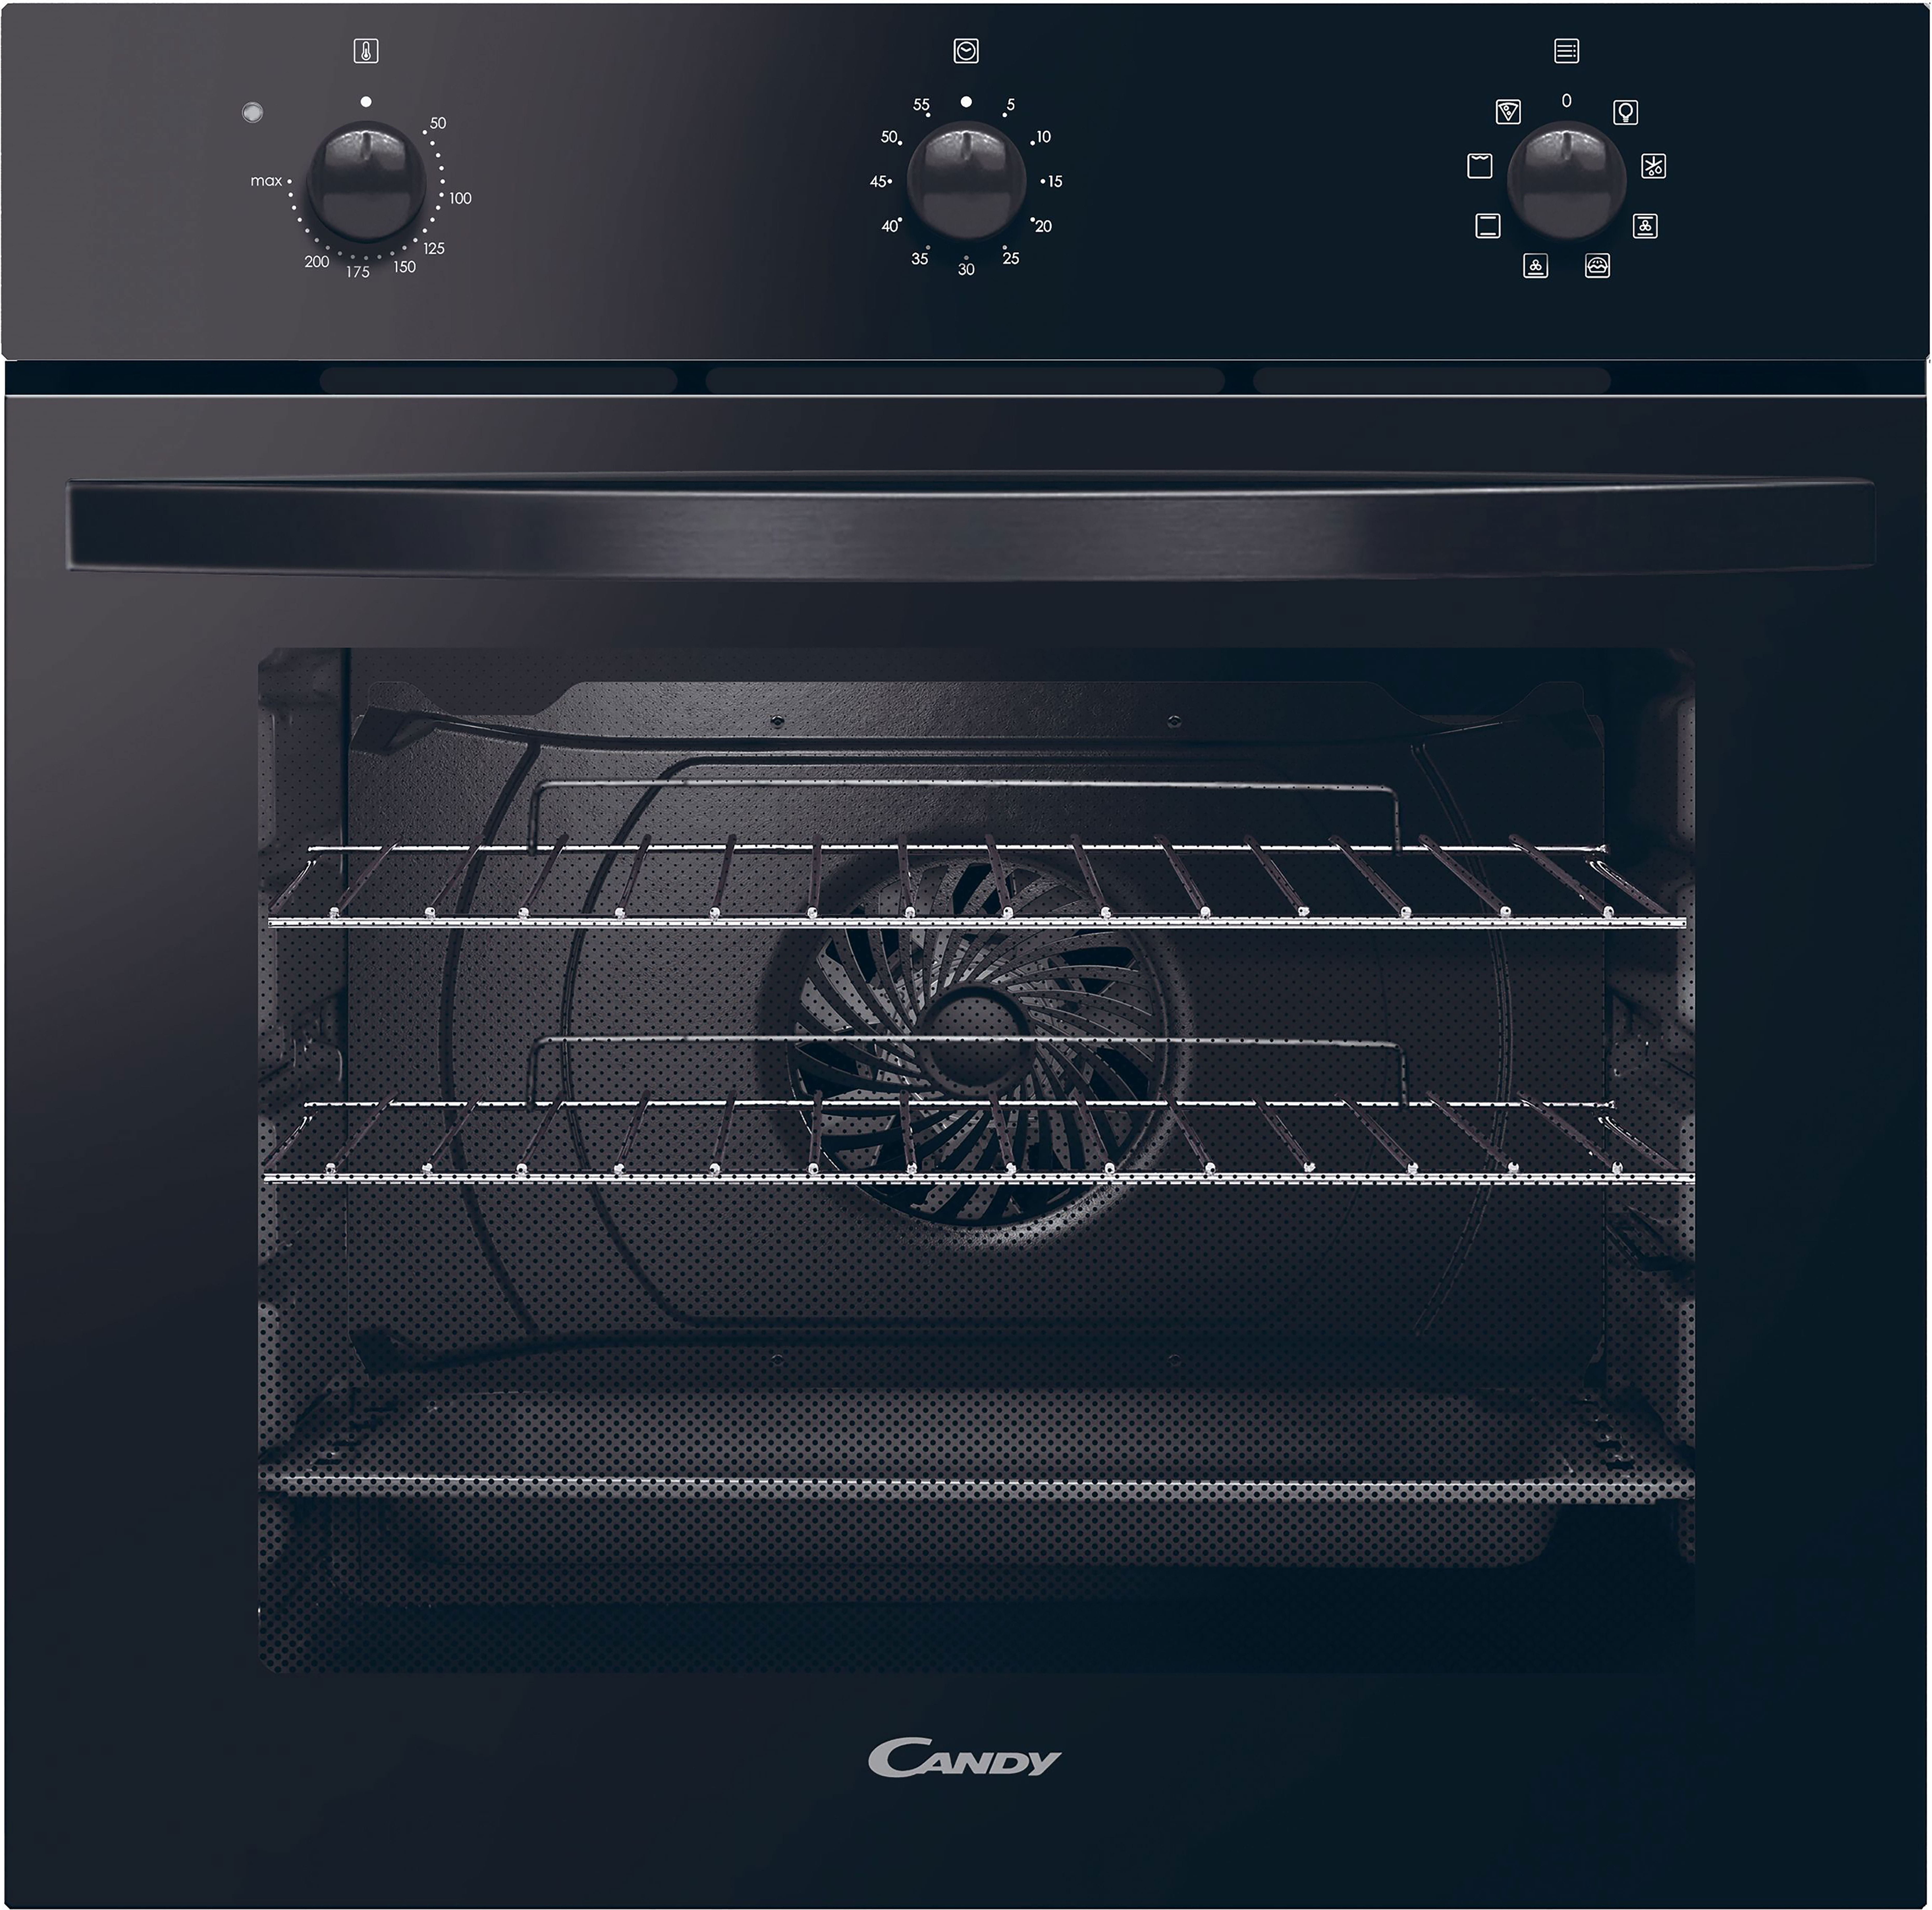 Candy Idea FIDCN602 Built In Electric Single Oven - Black - A+ Rated, Black